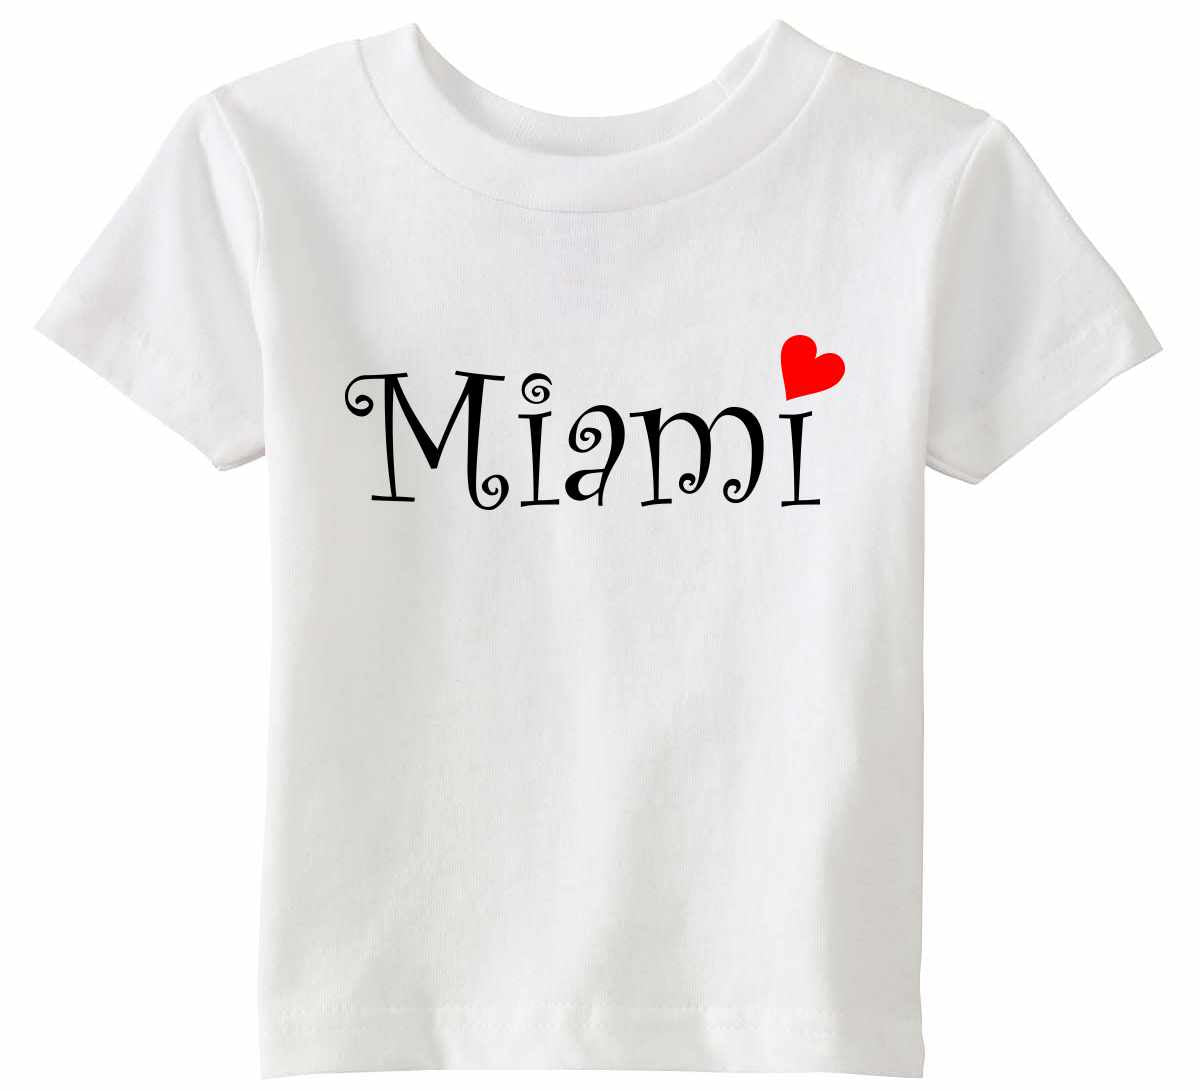 Miami City on Infant-Toddler T-Shirt